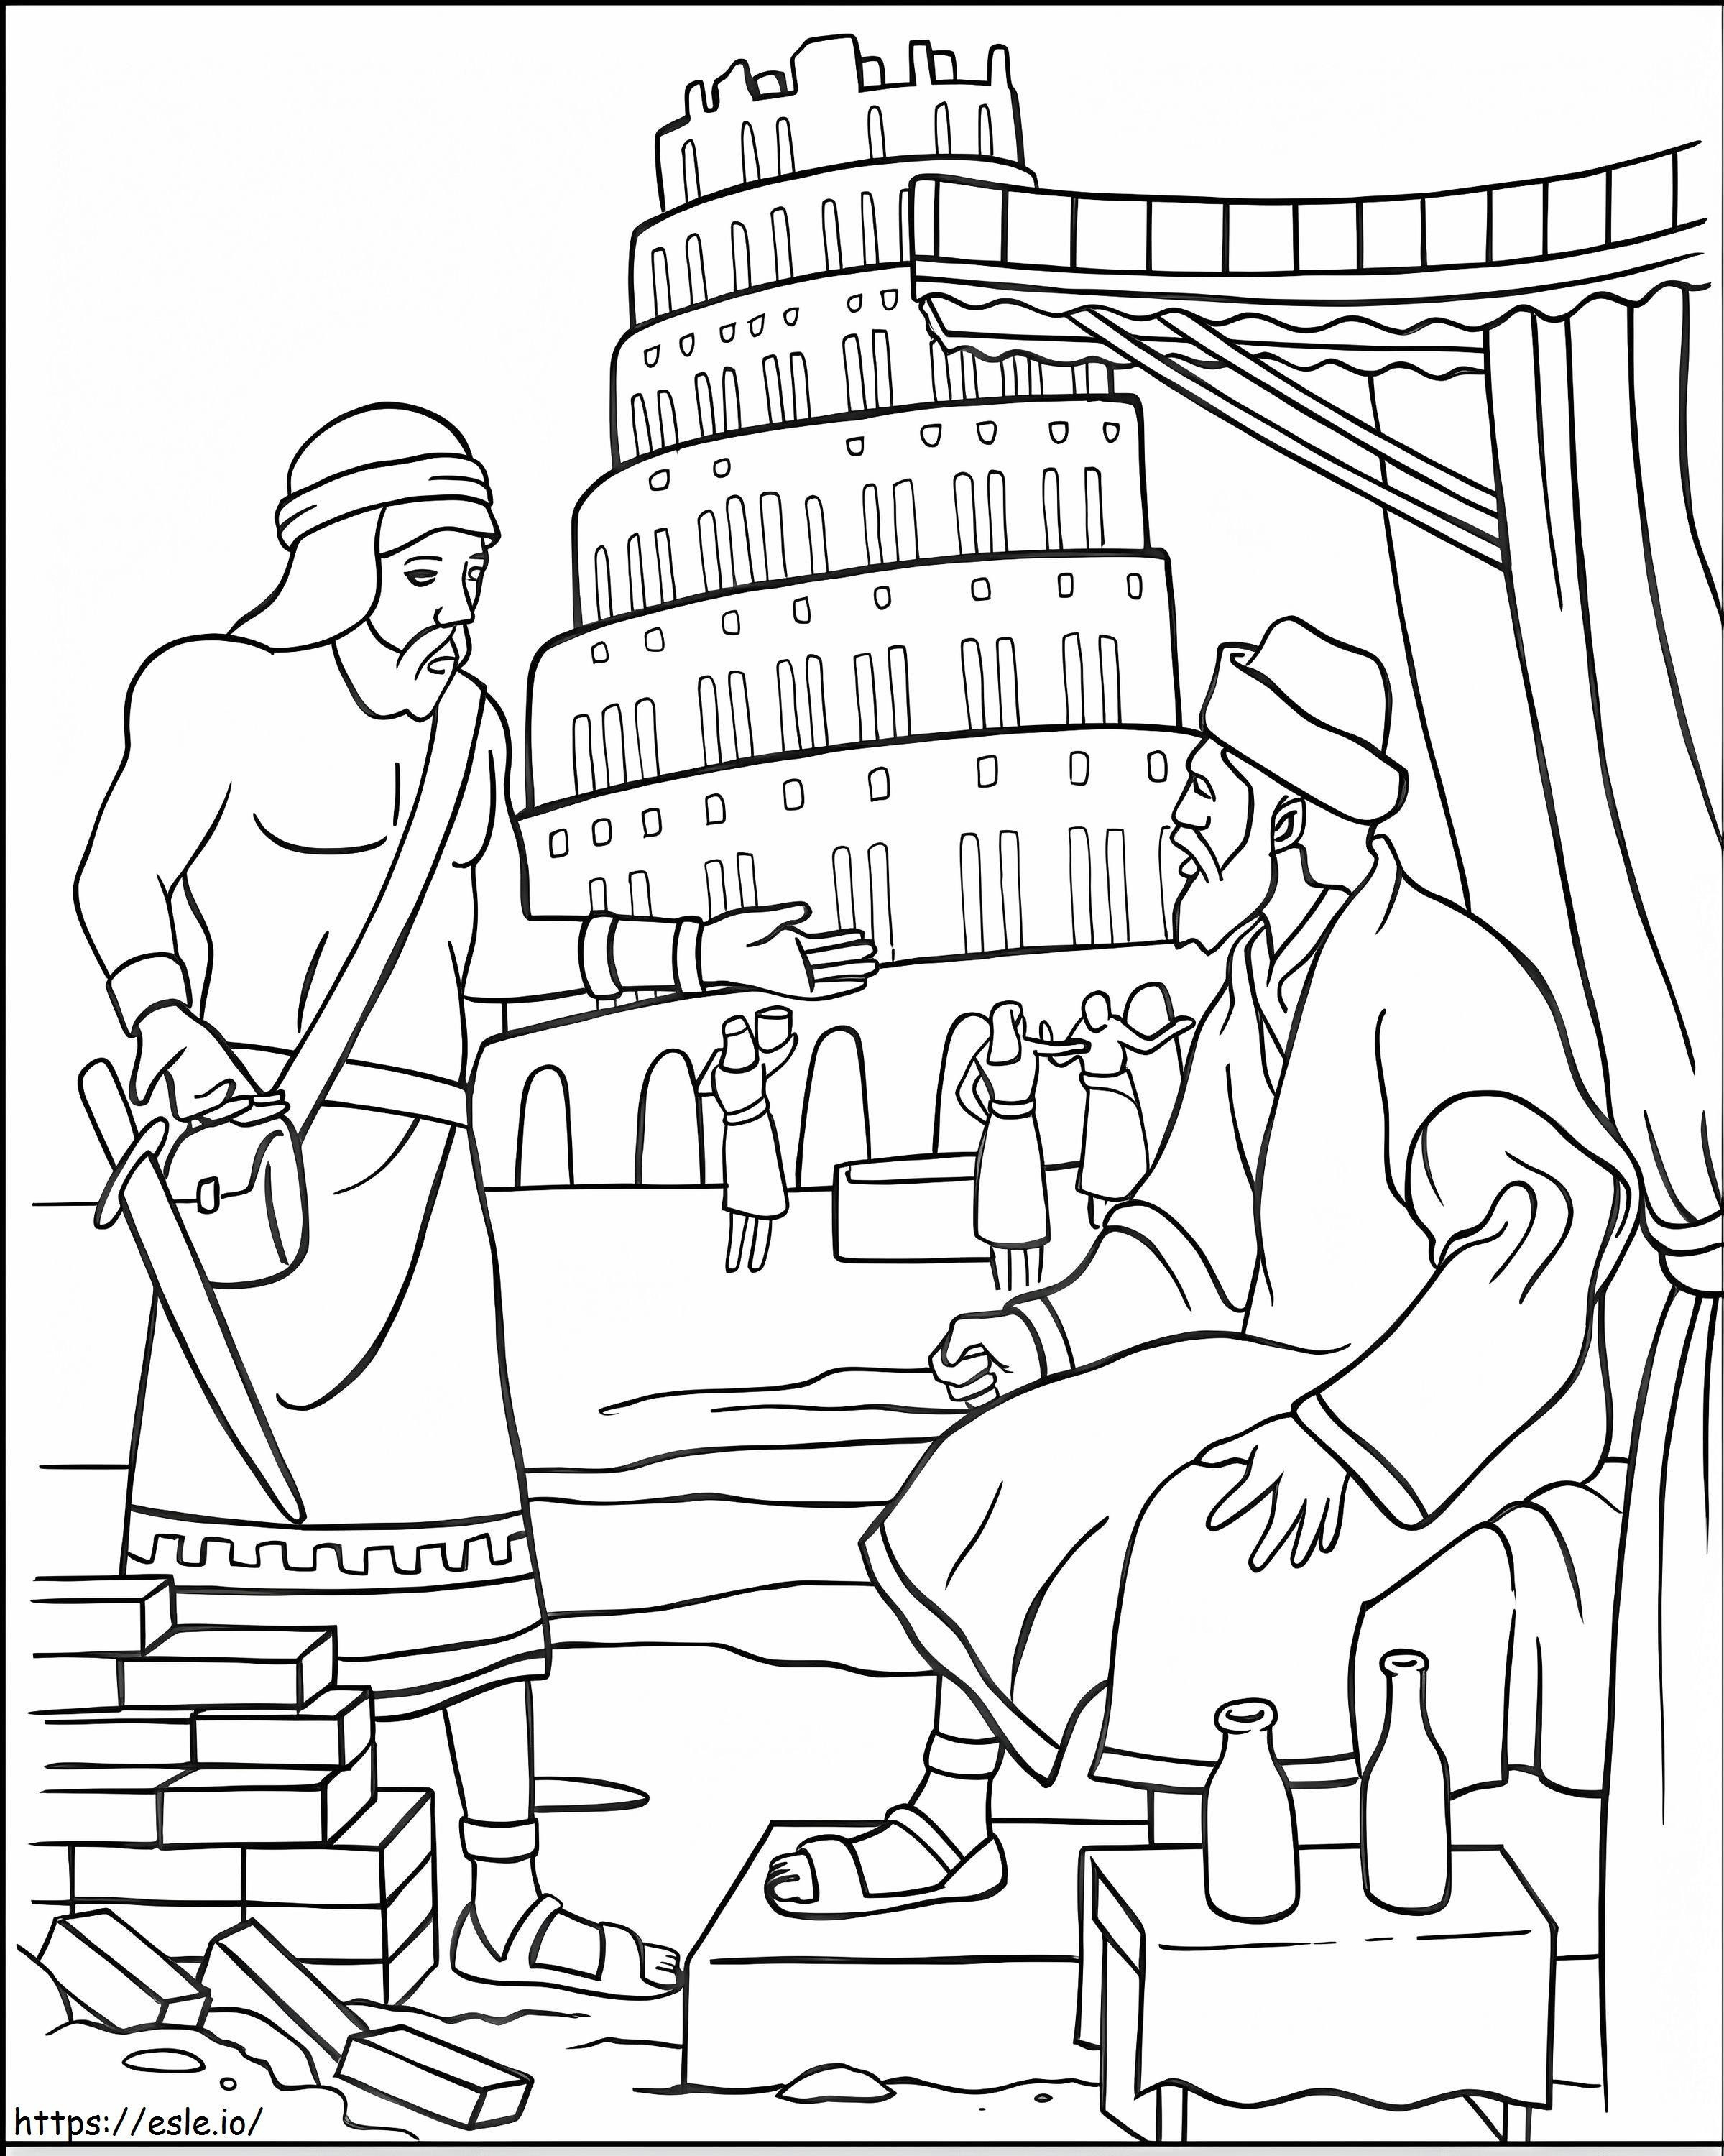 Tower Of Babel 4 coloring page